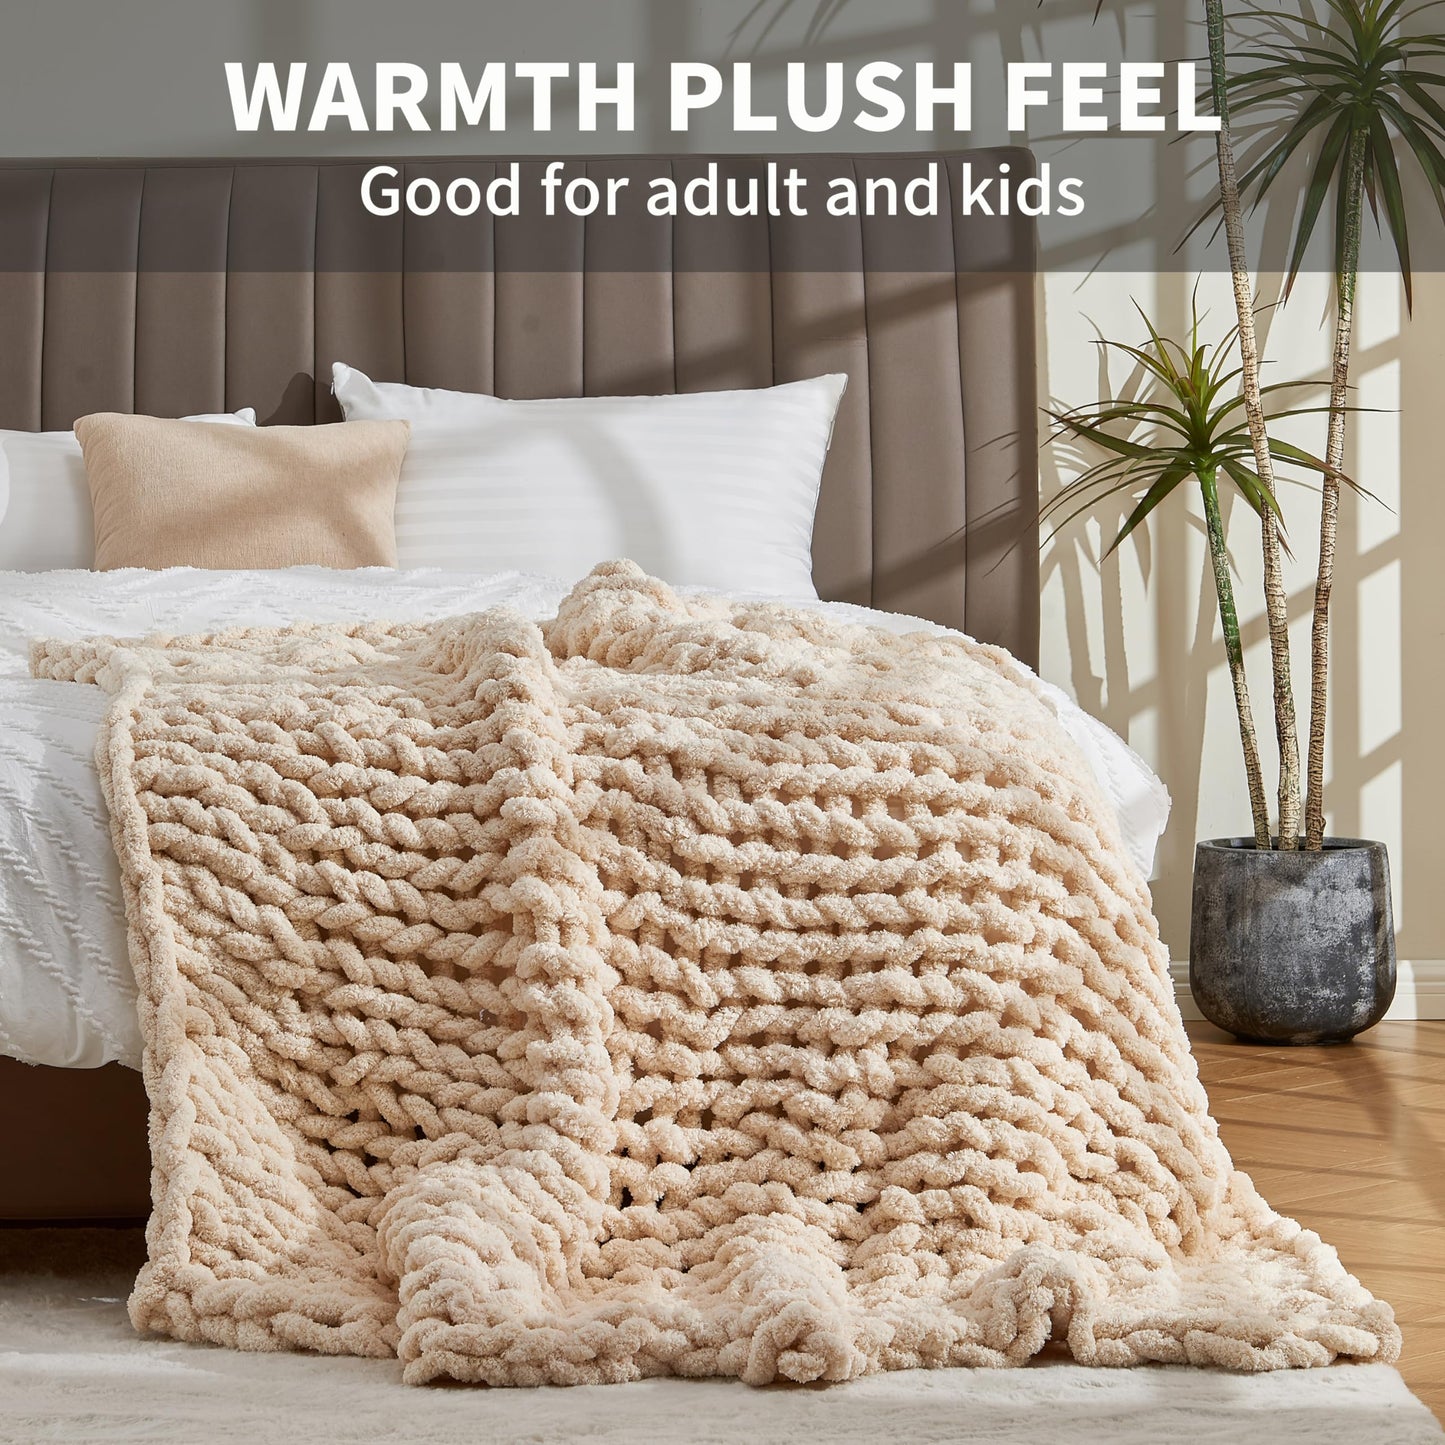 Chunky Knit Soft Throw Blanket - Cream - Chunky Chenille Cable Knitted Fluffy & Warm Chunky Throw Blanket with Woven Bag for Boho Home Decor, Handmade Large Knit Blanket for Bed & Couch 50" x 60"